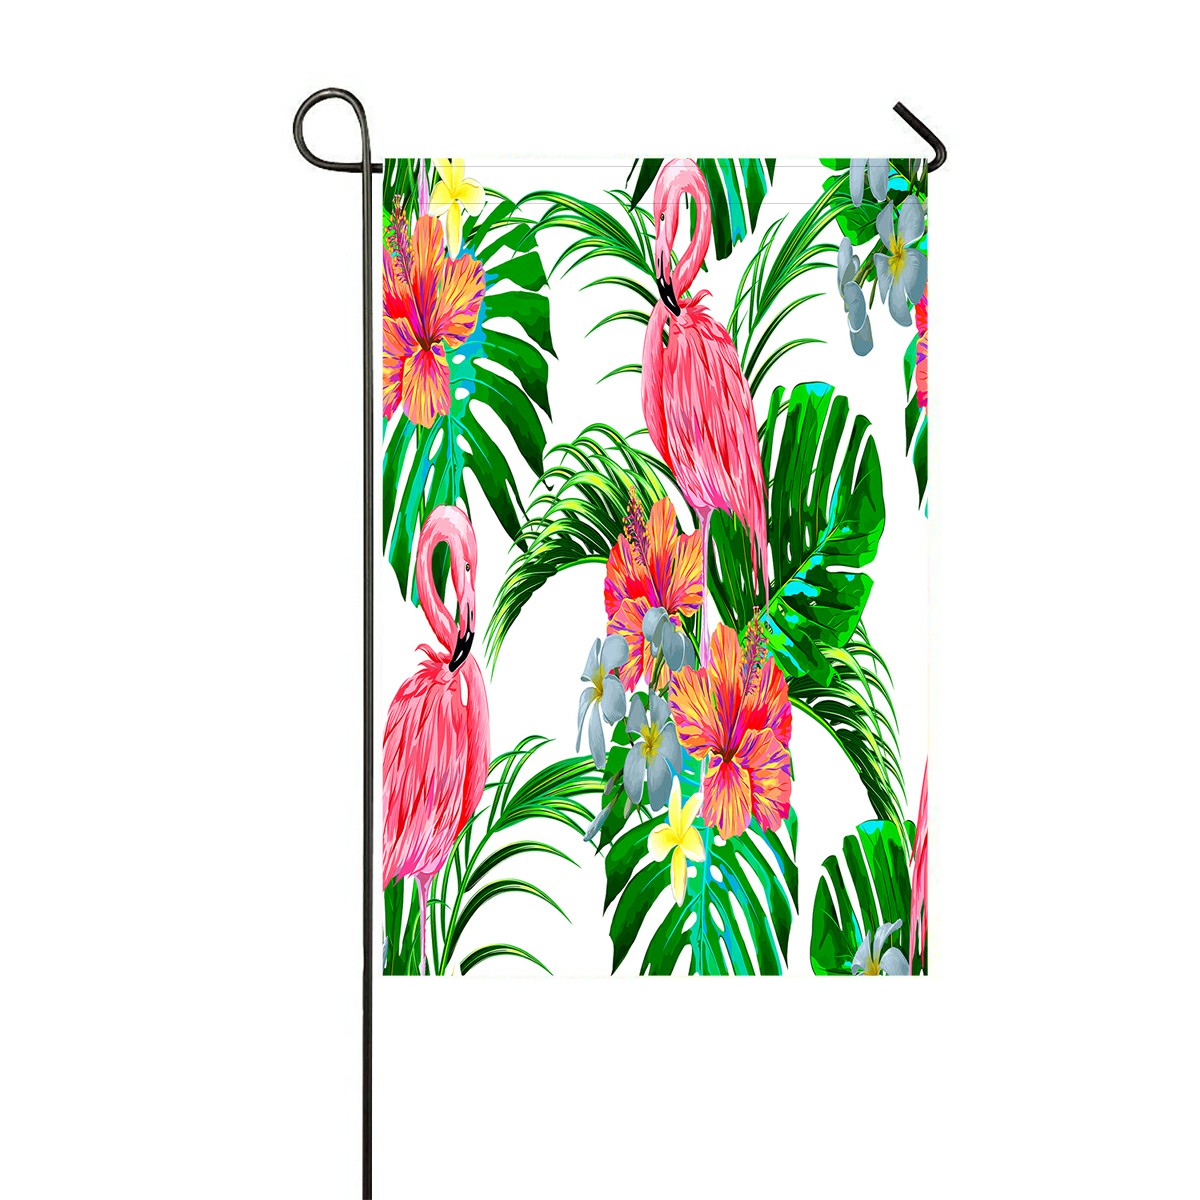 ECZJNT floral flowers palm leaves jungle plants hibiscus bird flamingos Garden Flag Outdoor Flag Home Party Garden Decor 12x18 Inch - image 1 of 1